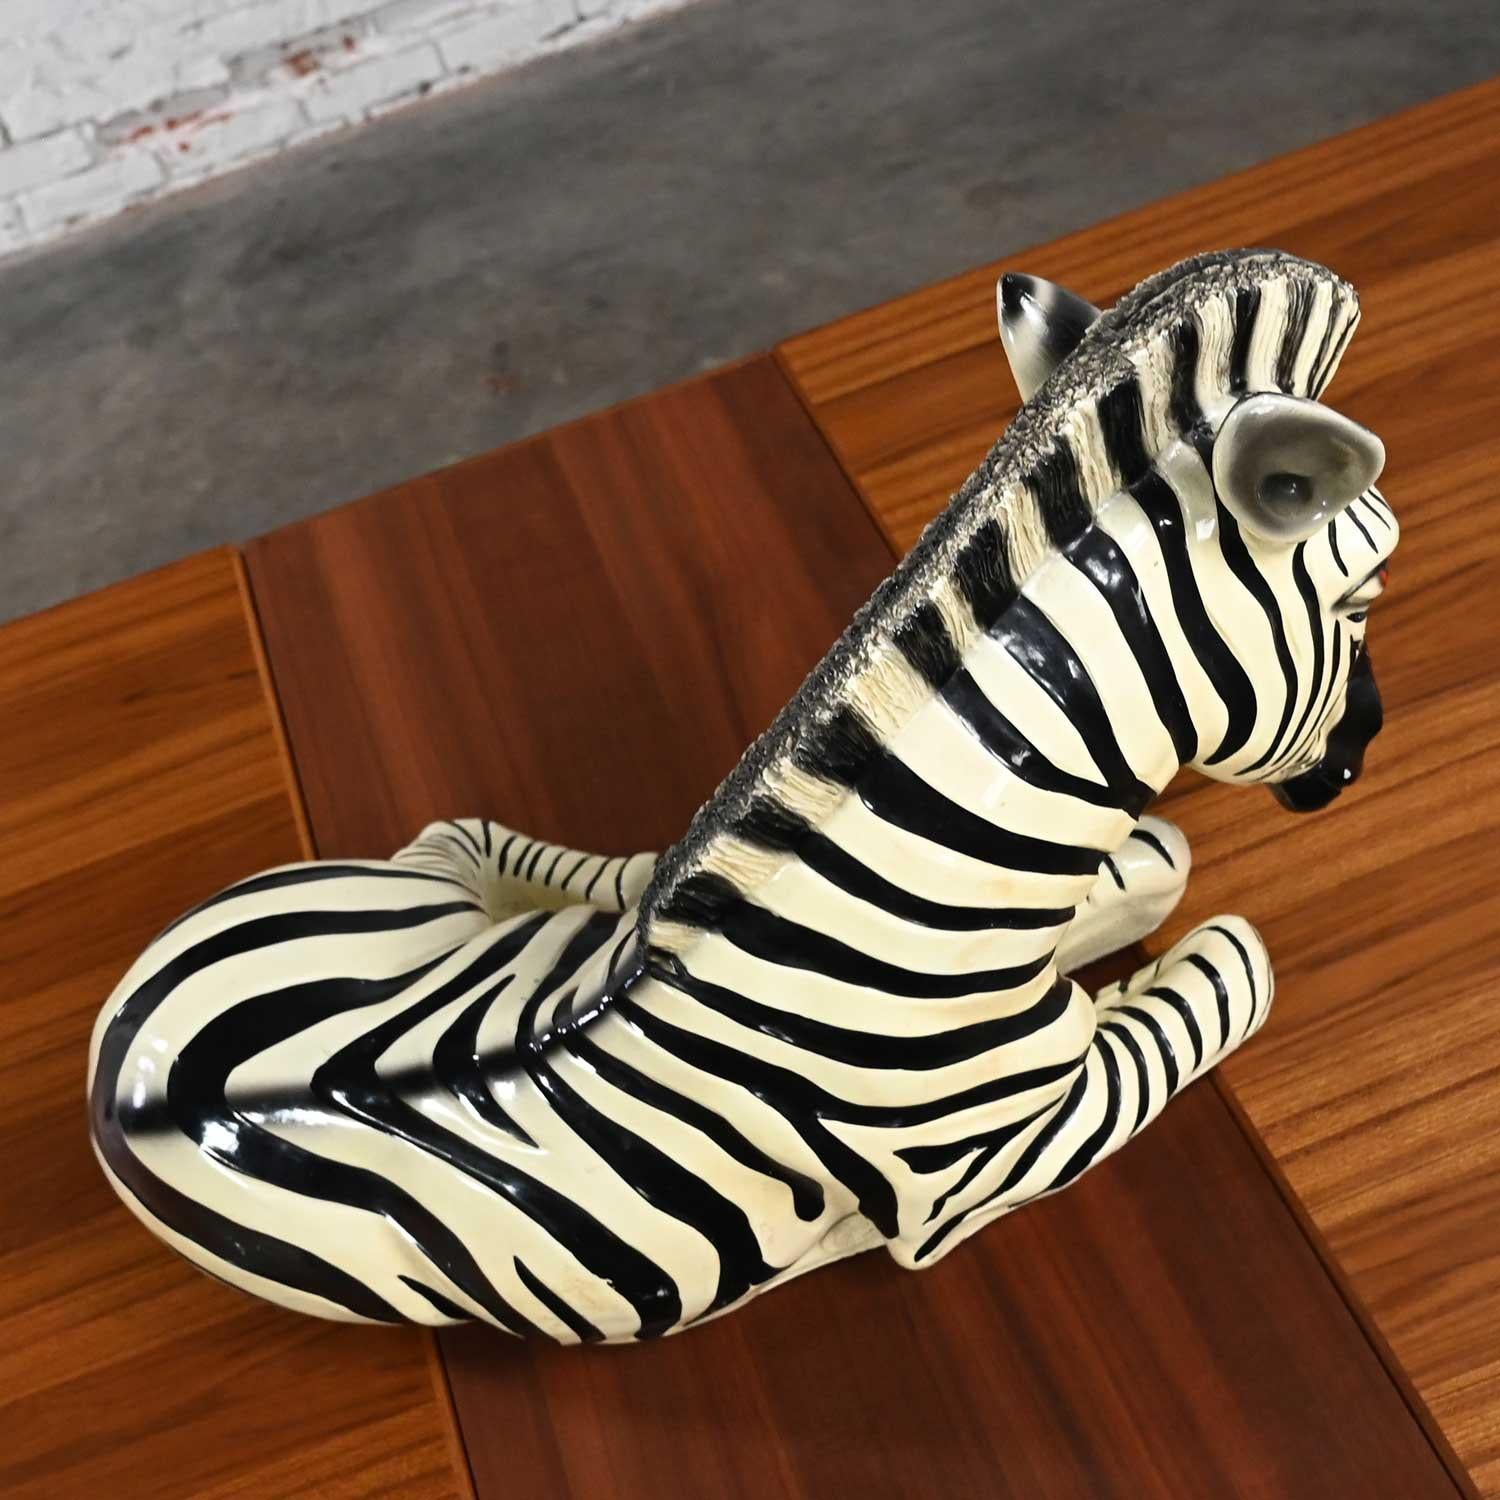 1970s Marwal Industries Large Scale Zebra Molded Resin Statue or Sculpture For Sale 5